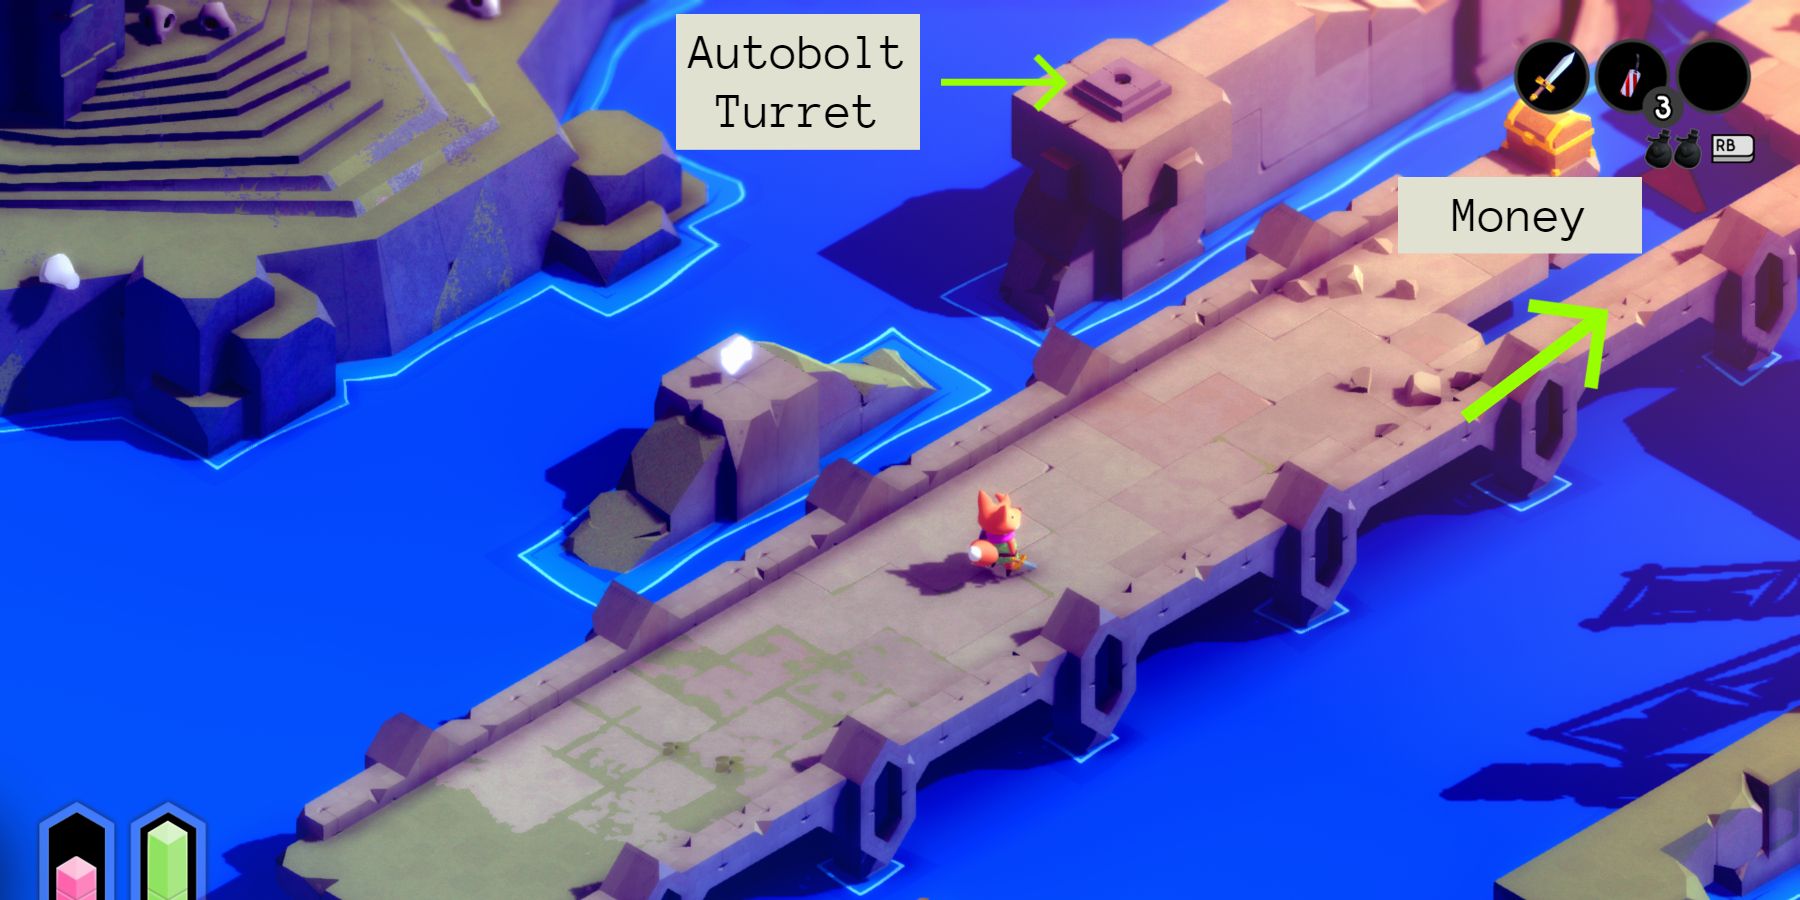 a red fox standing on a crumbling bridge over a lake with a treasure chest ahead that has the word "money" under it. There's also a box that says "autobolt turret" with a green arrow pointing to a grey plinth with a hole in the middel. There's also another green arrow pointing along the path forward, past the chest 